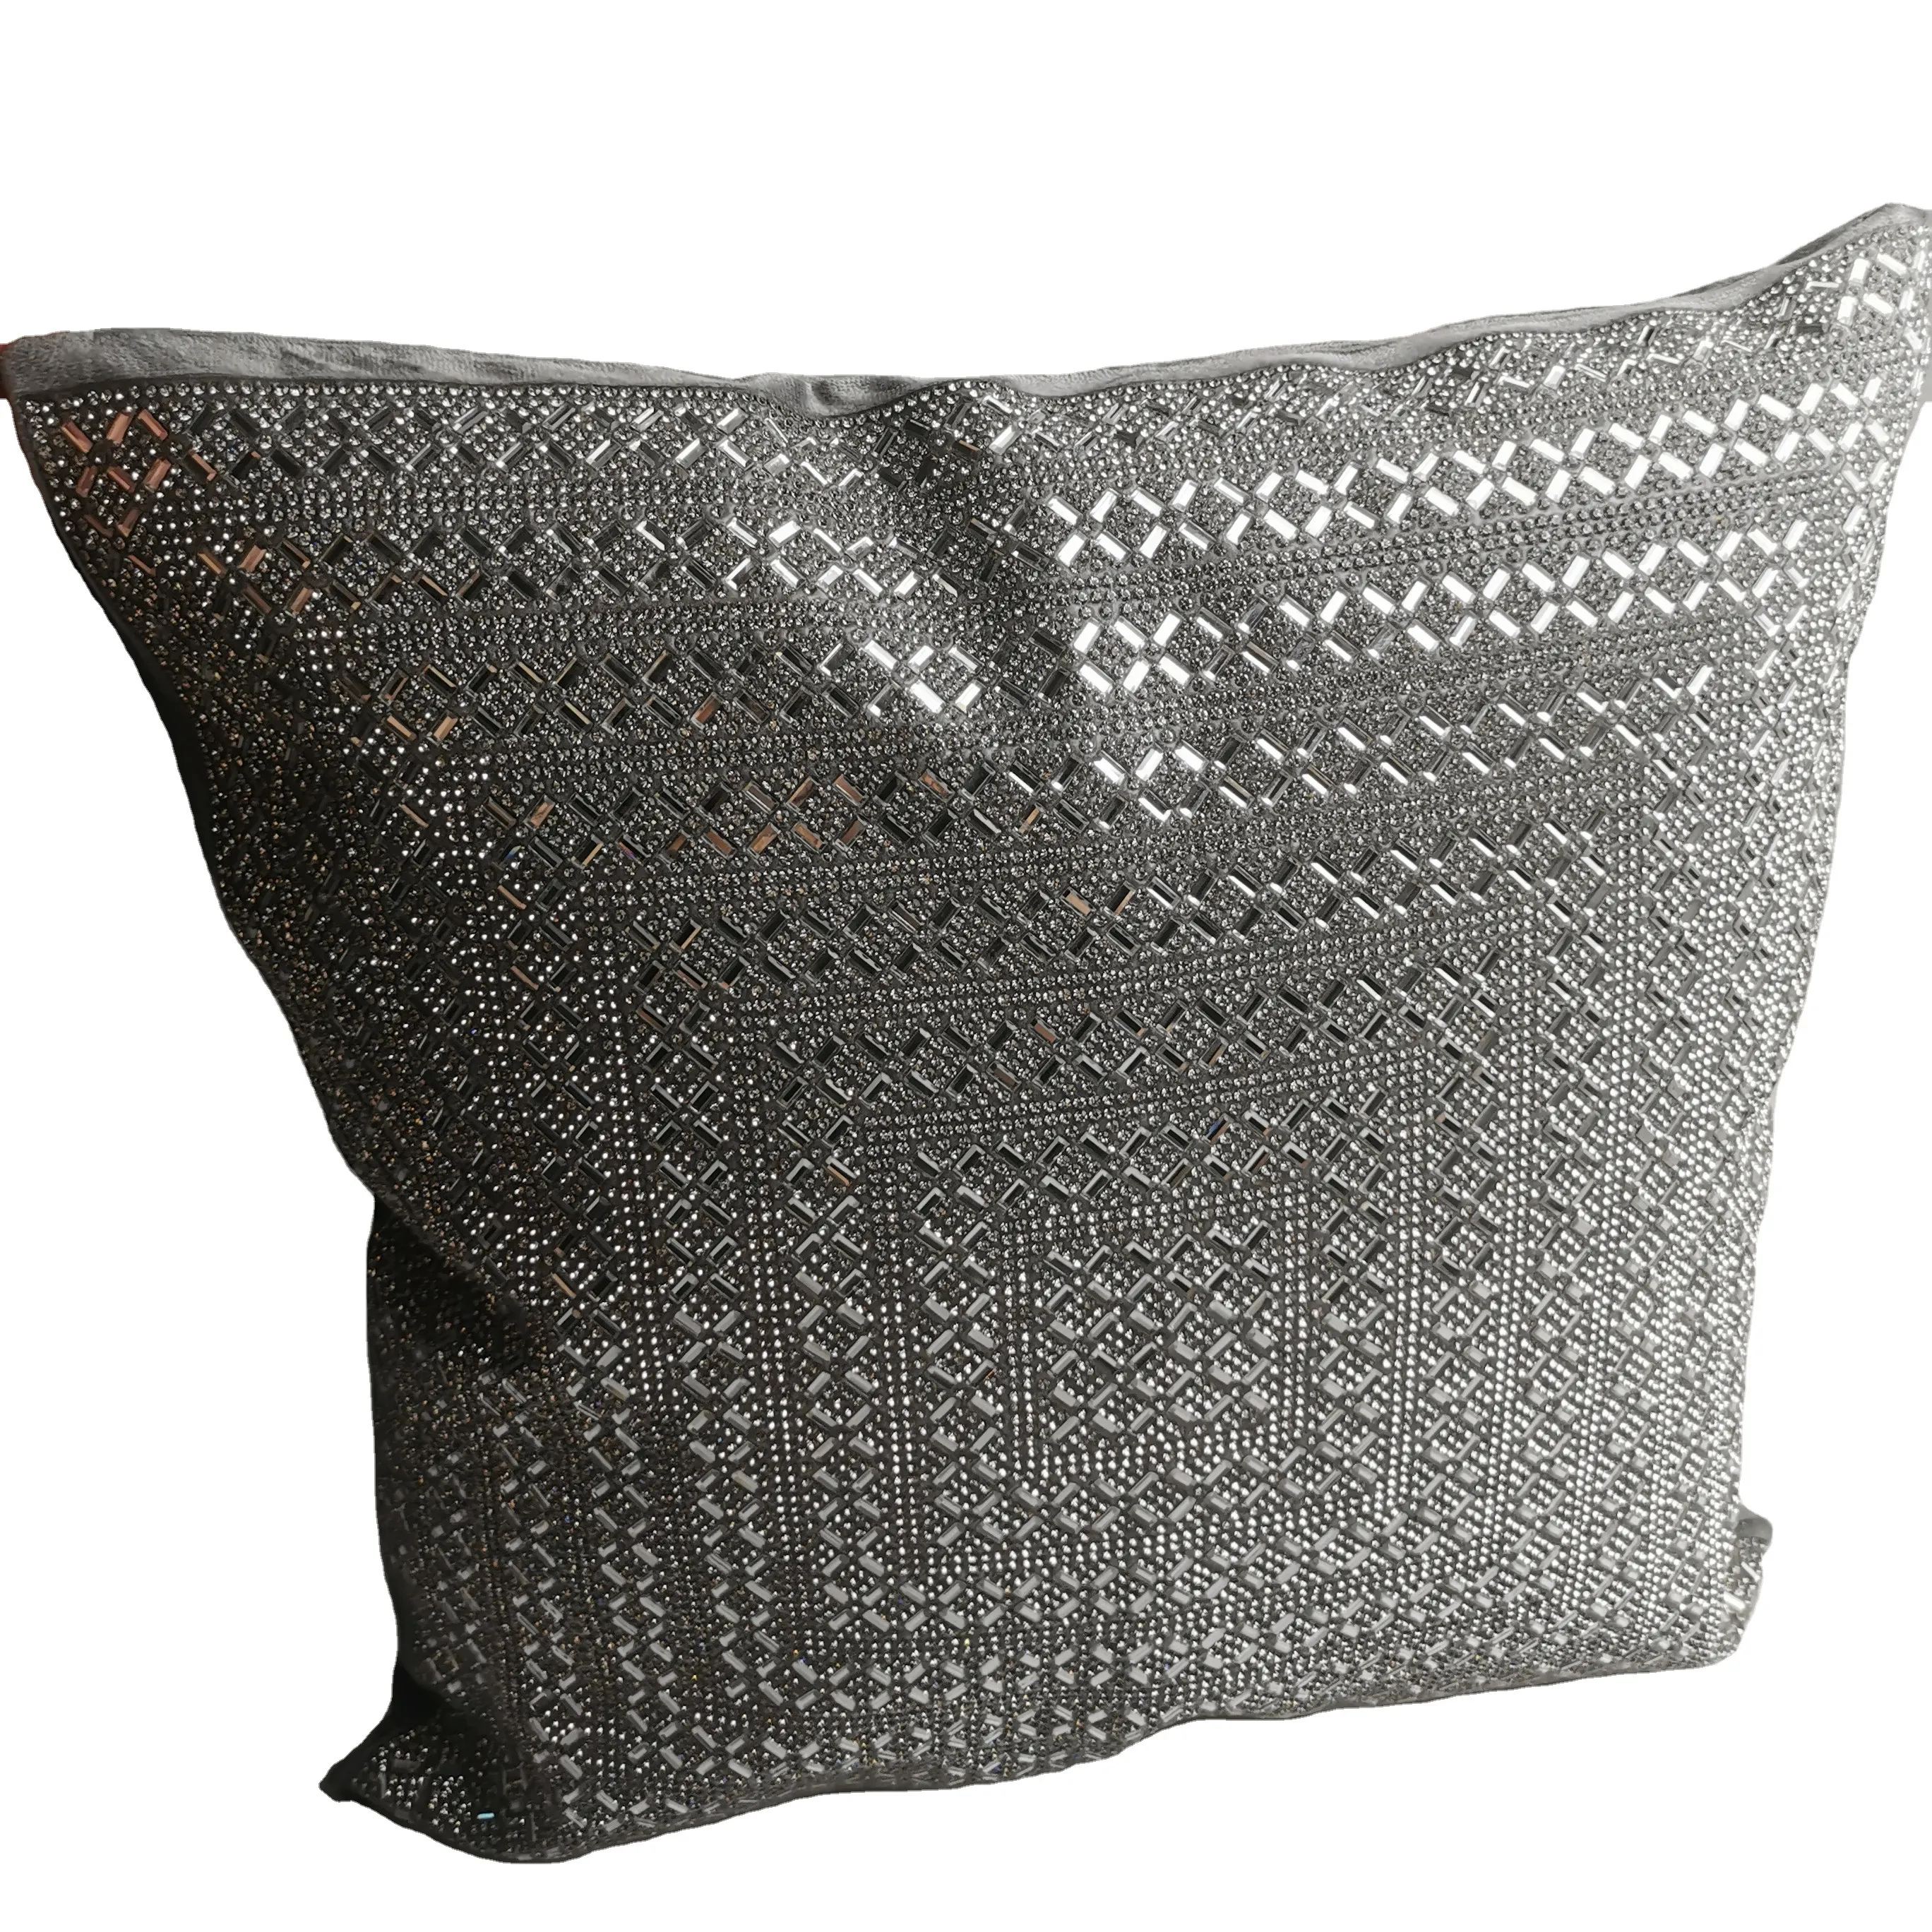 Luxurious Crystal Rhinestone Bling Customer Design Pillow Cover Home Decorations Cushion Cover